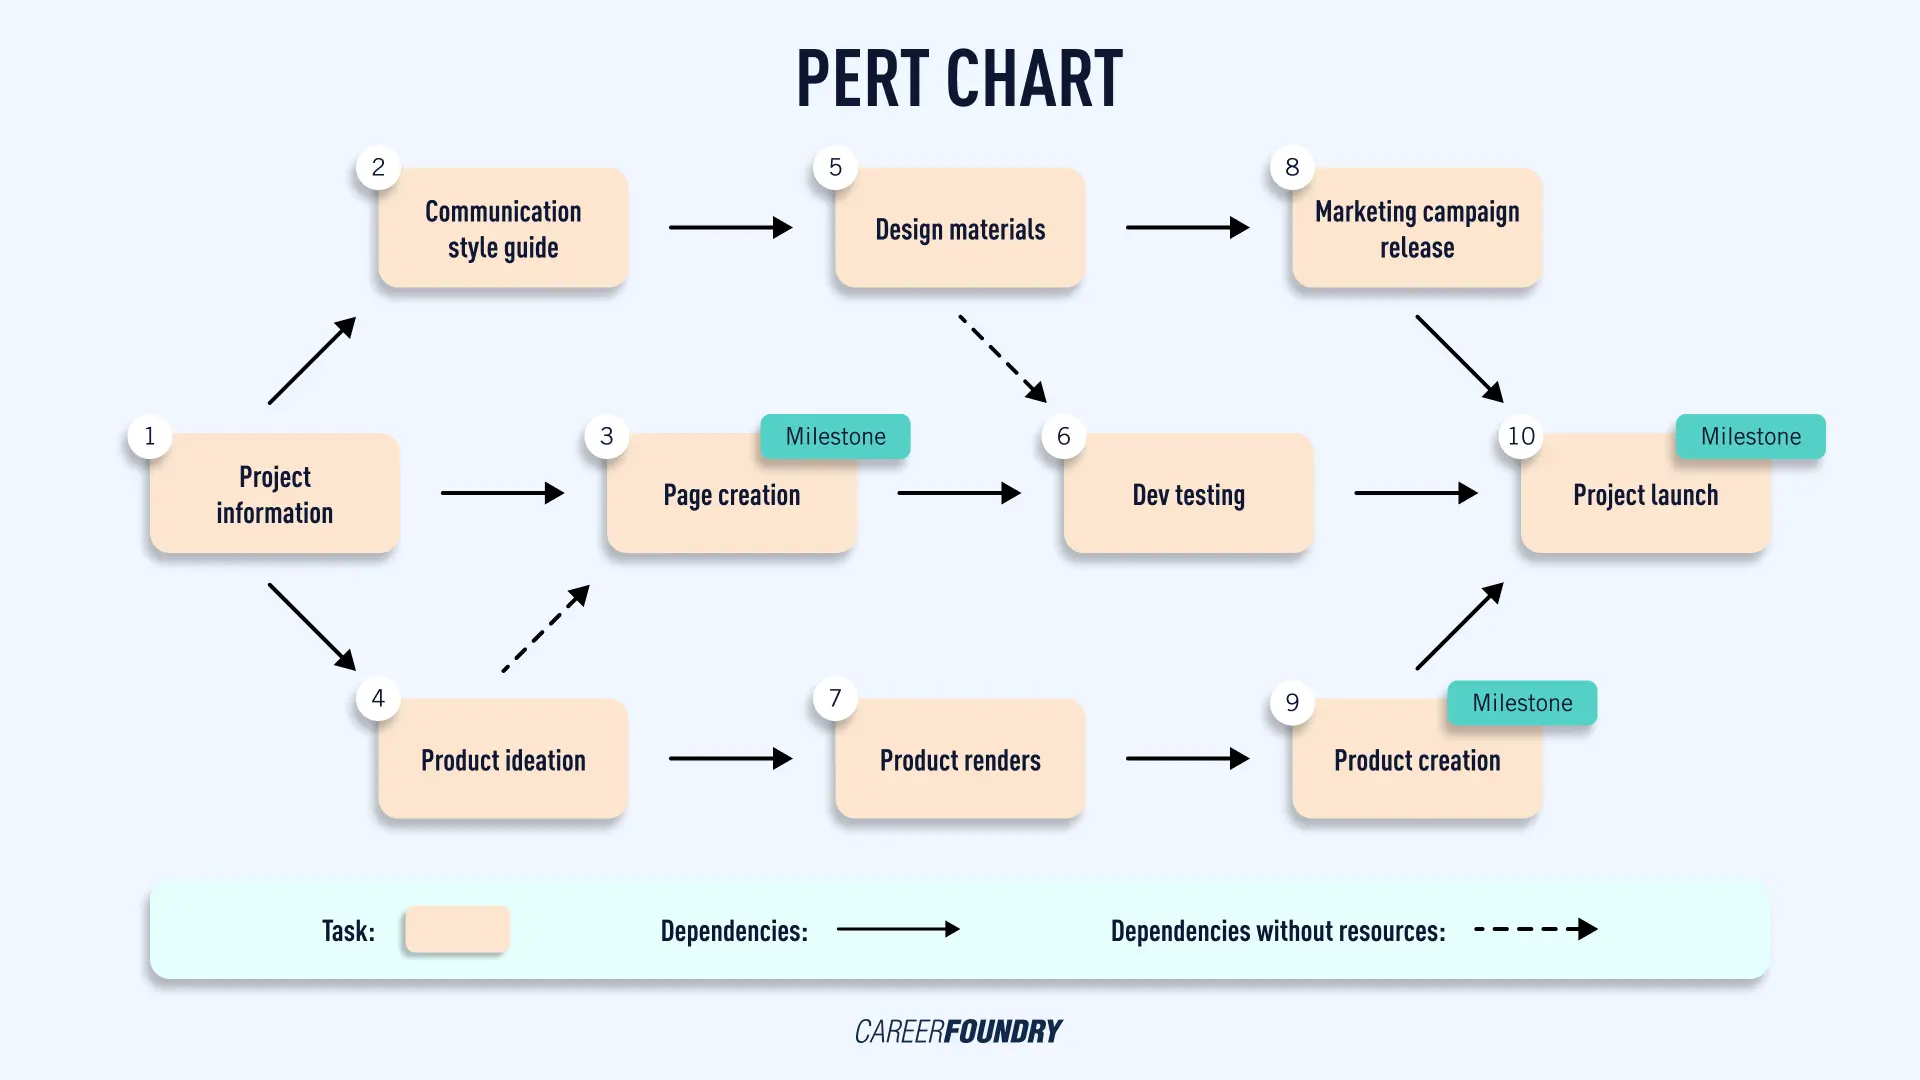 A PERT chart example, showing tasks, dependencies, and milestones.